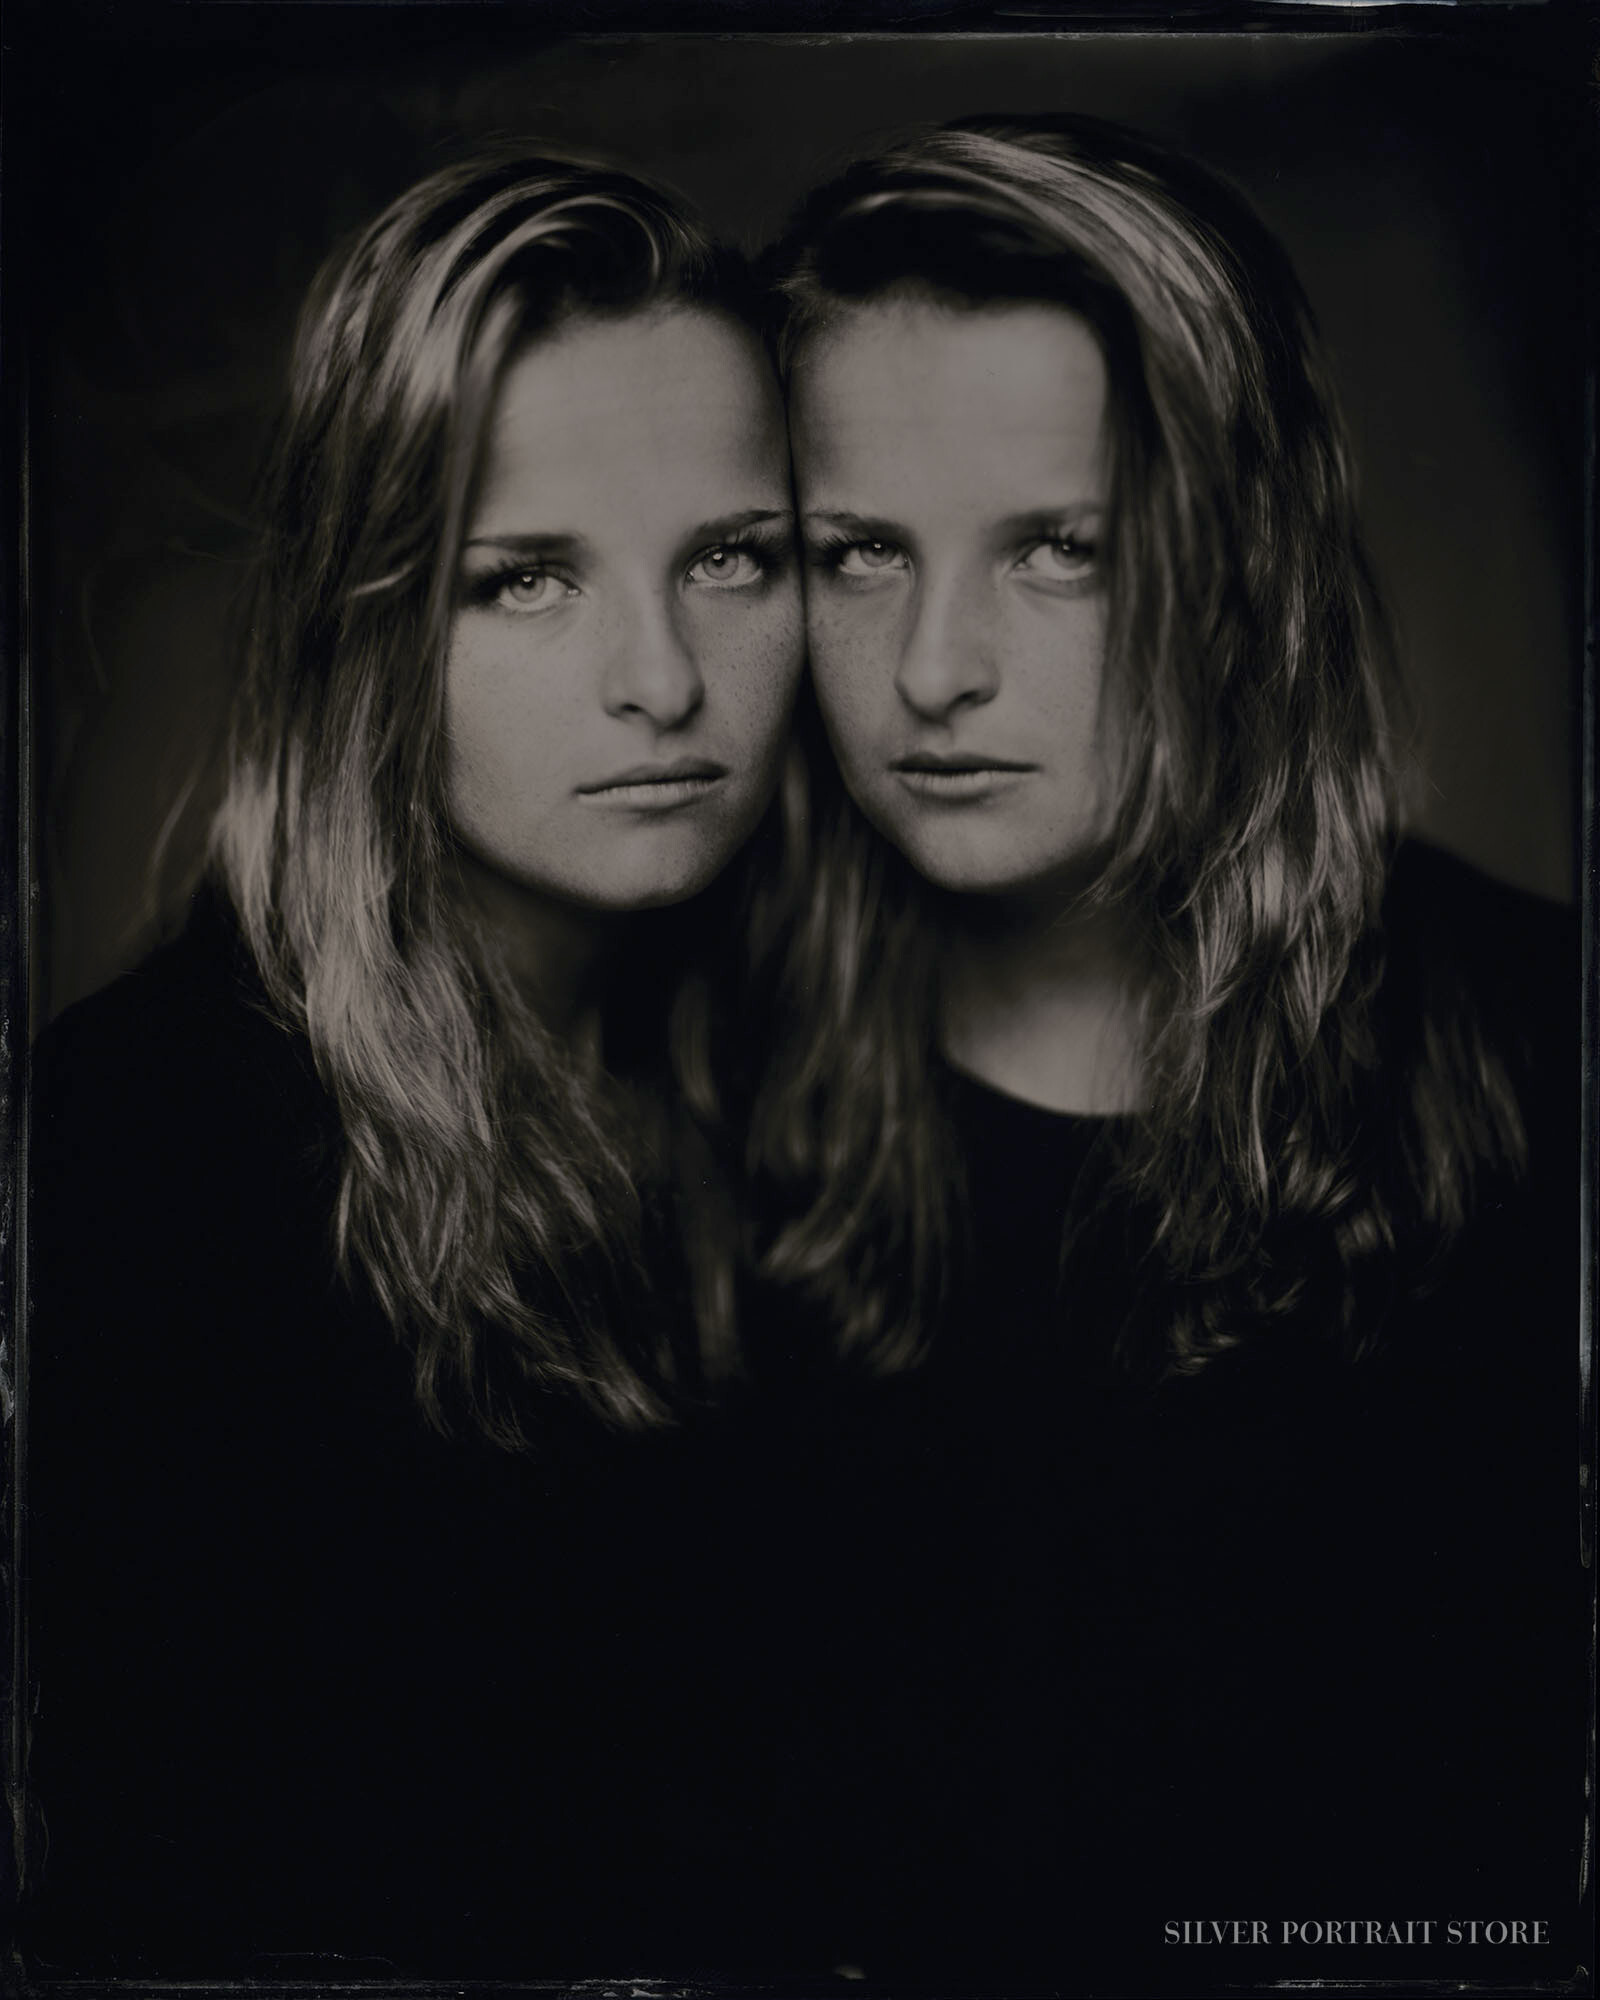 Kelly & Jaimy-Silver Portrait Store-Scan from Wet plate collodion-Tintype 20 x 25 cm